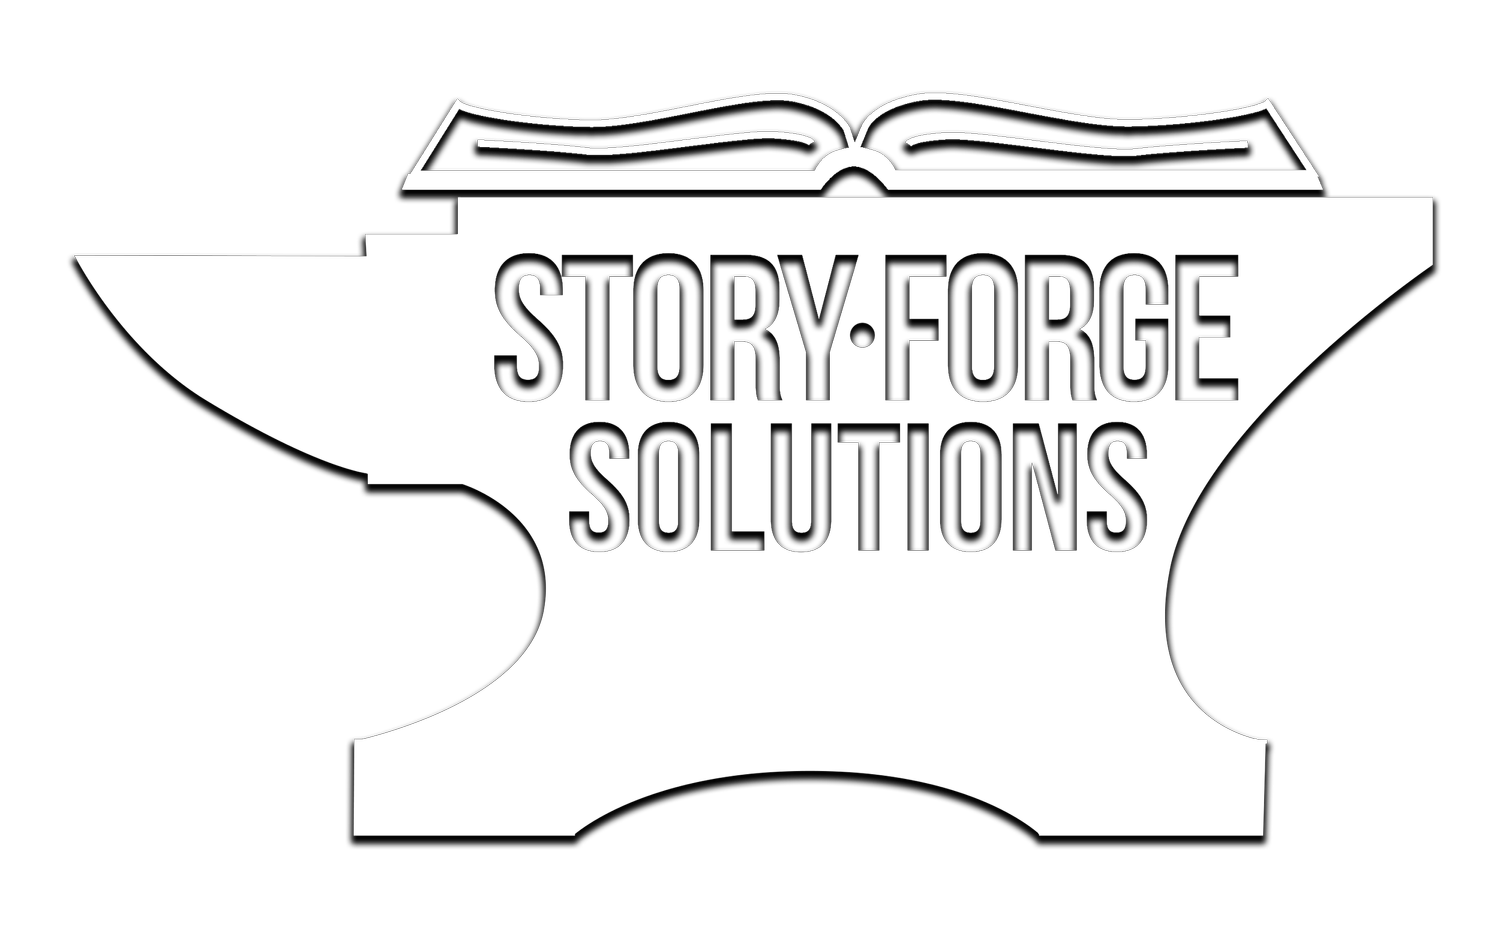 Story-Forge Solutions